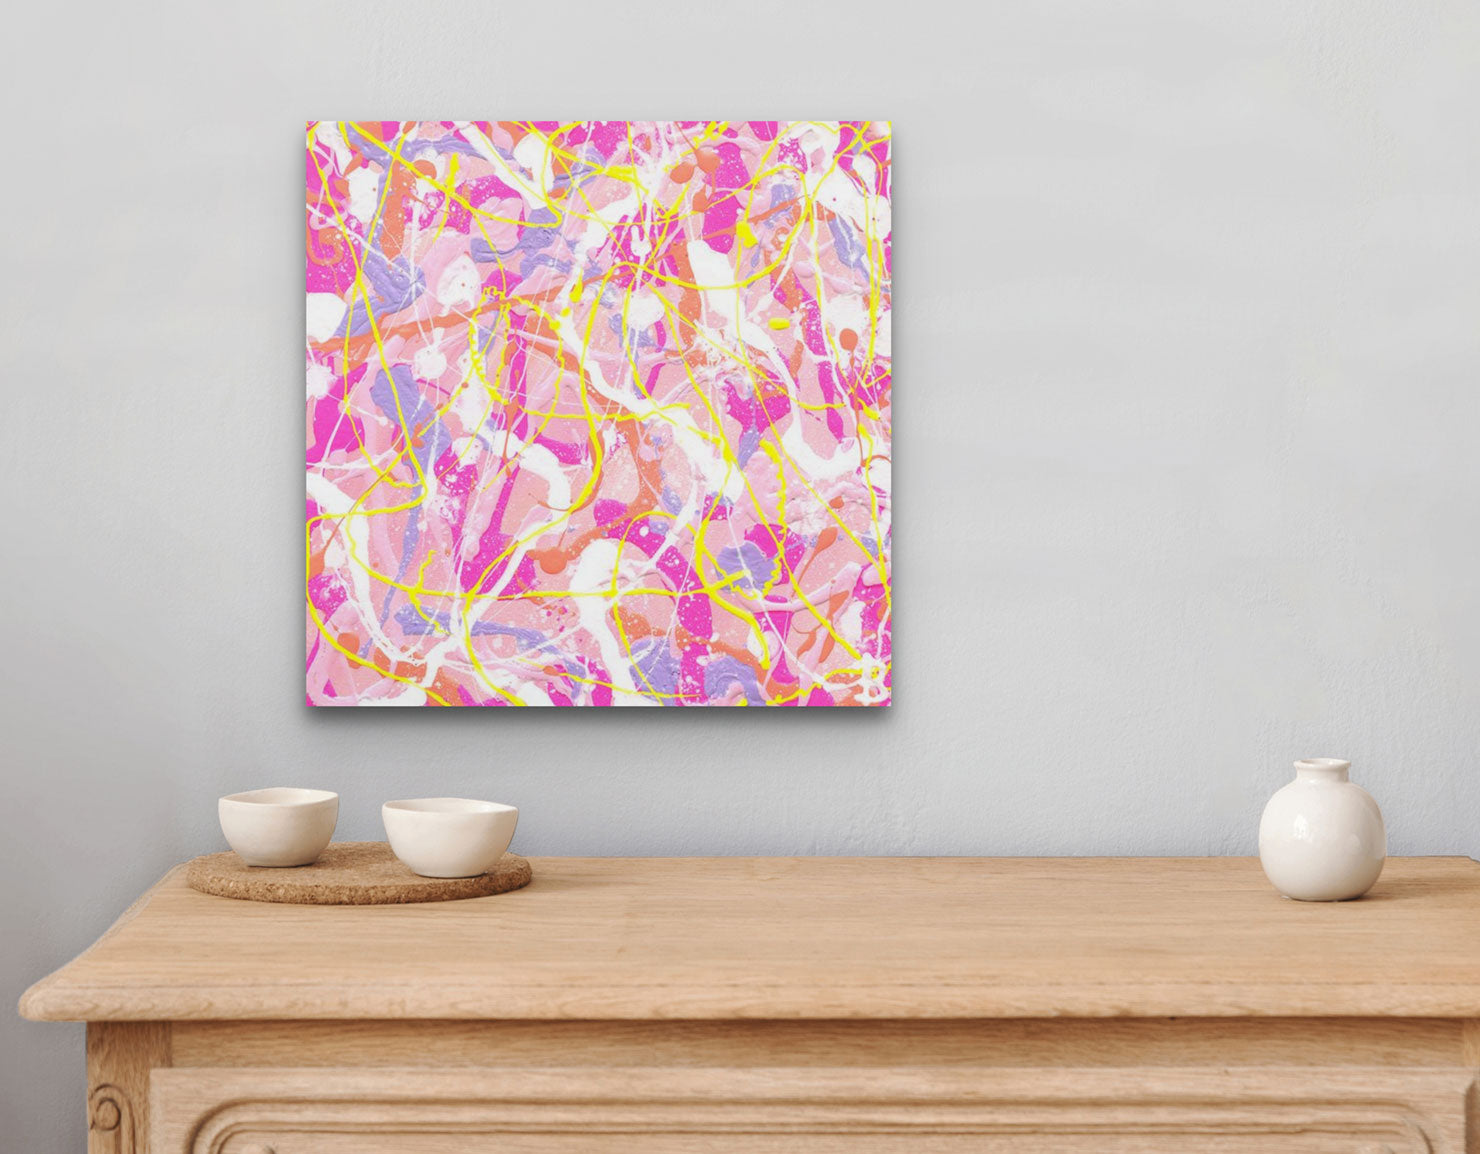 'Cupcake I' original, textured, abstract painting on canvas in beautiful pastel hues. Seen hanging above drawers with white ceramic bowls. Painted by Bridget Bradley, contemporary abstract Artist , Sunshine Coast Australia.